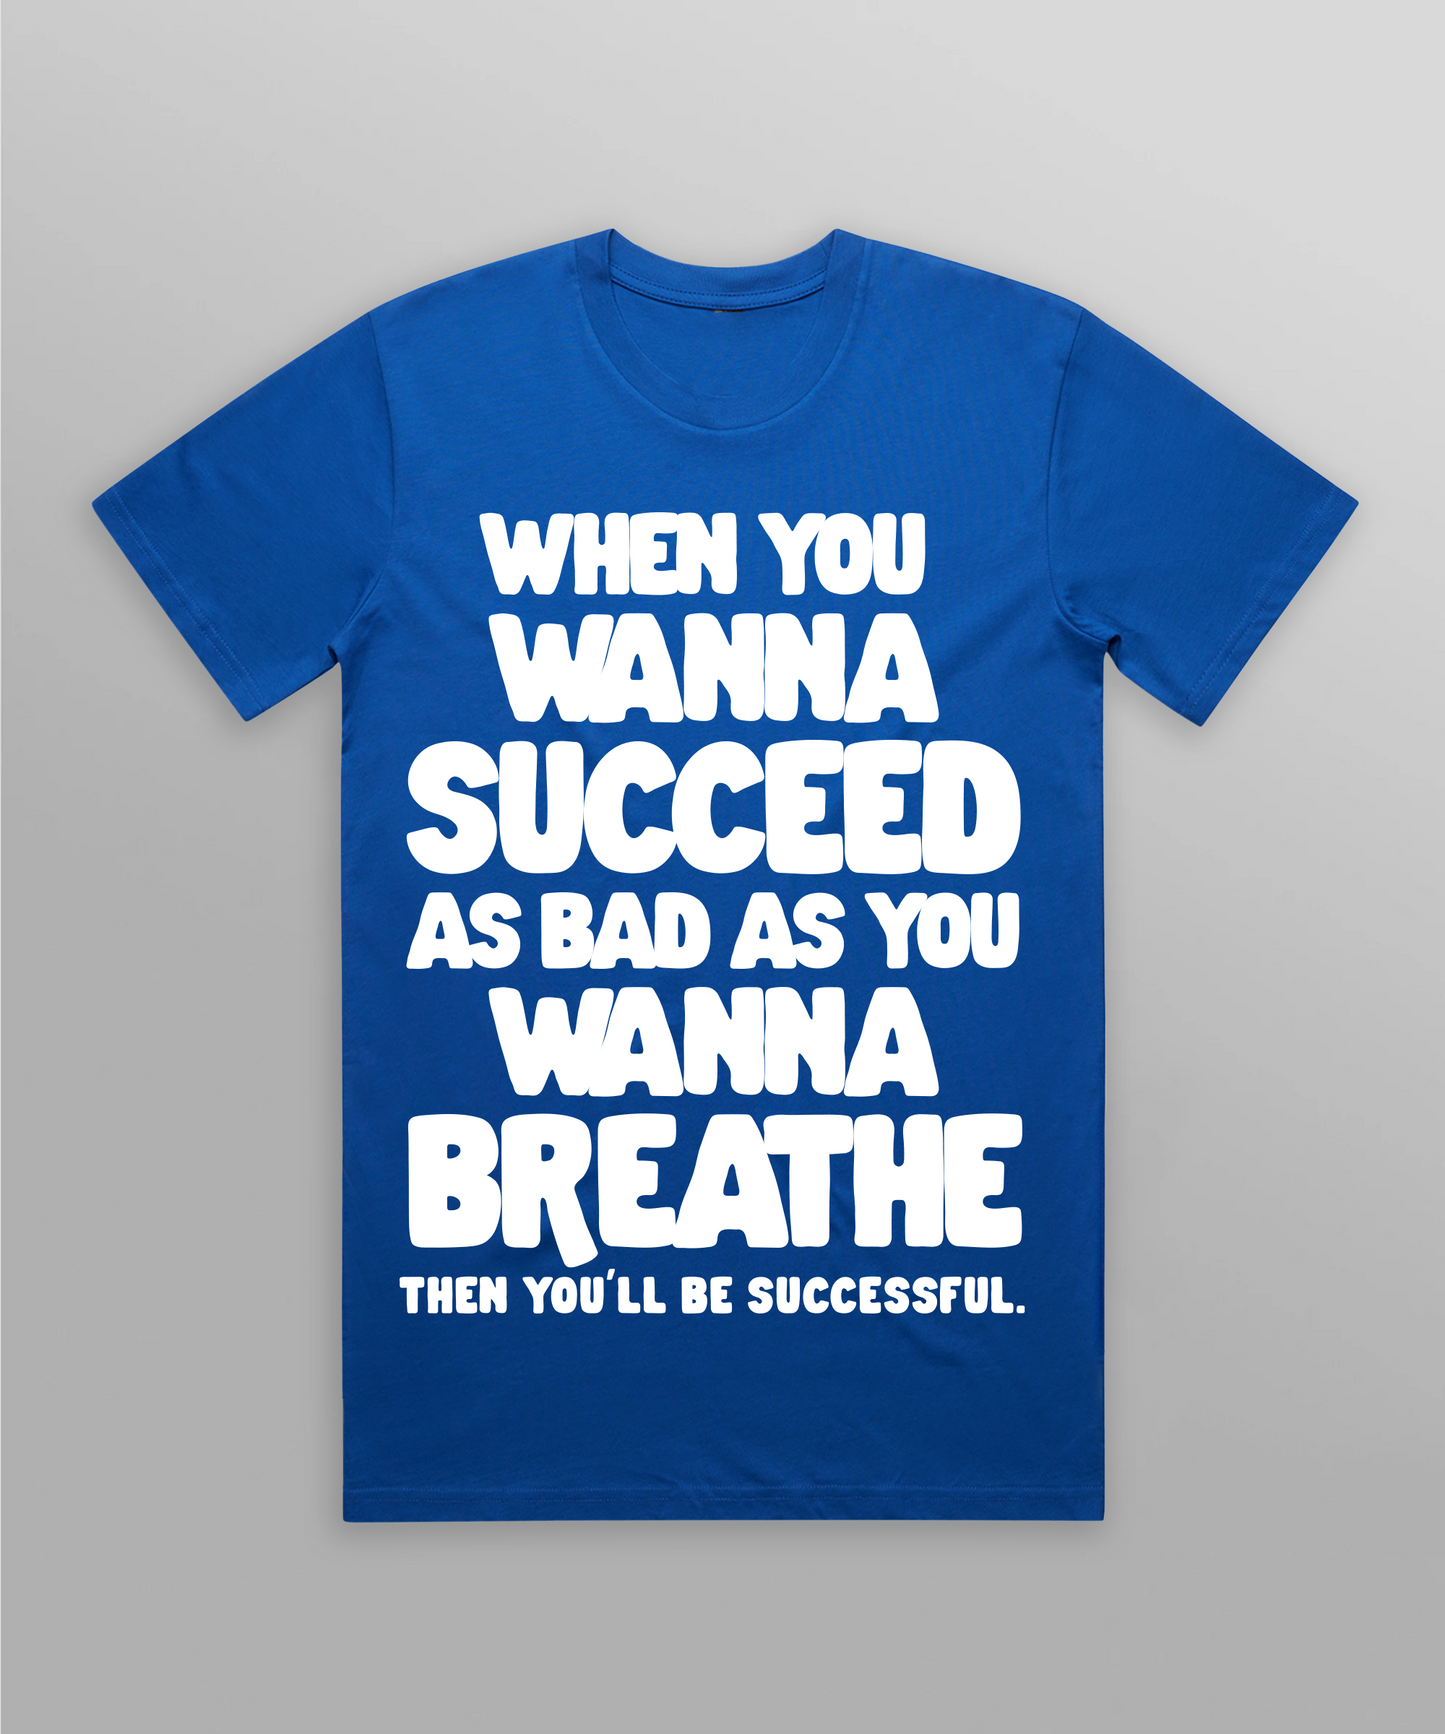 When You Wanna Succeed Tee - Blue/White